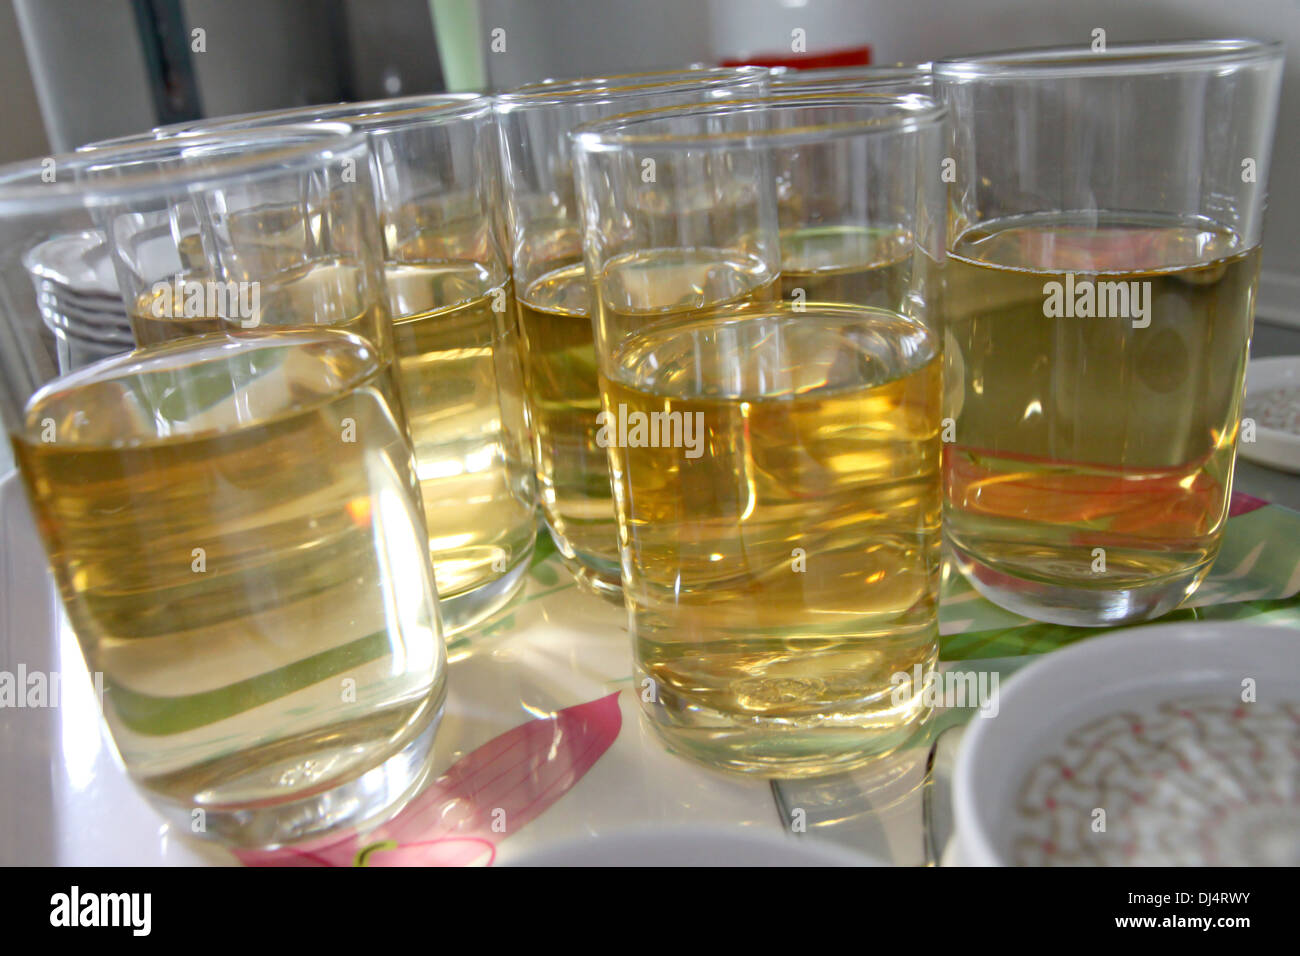 The Picture Alcohol in Many of glass,in the party. Stock Photo